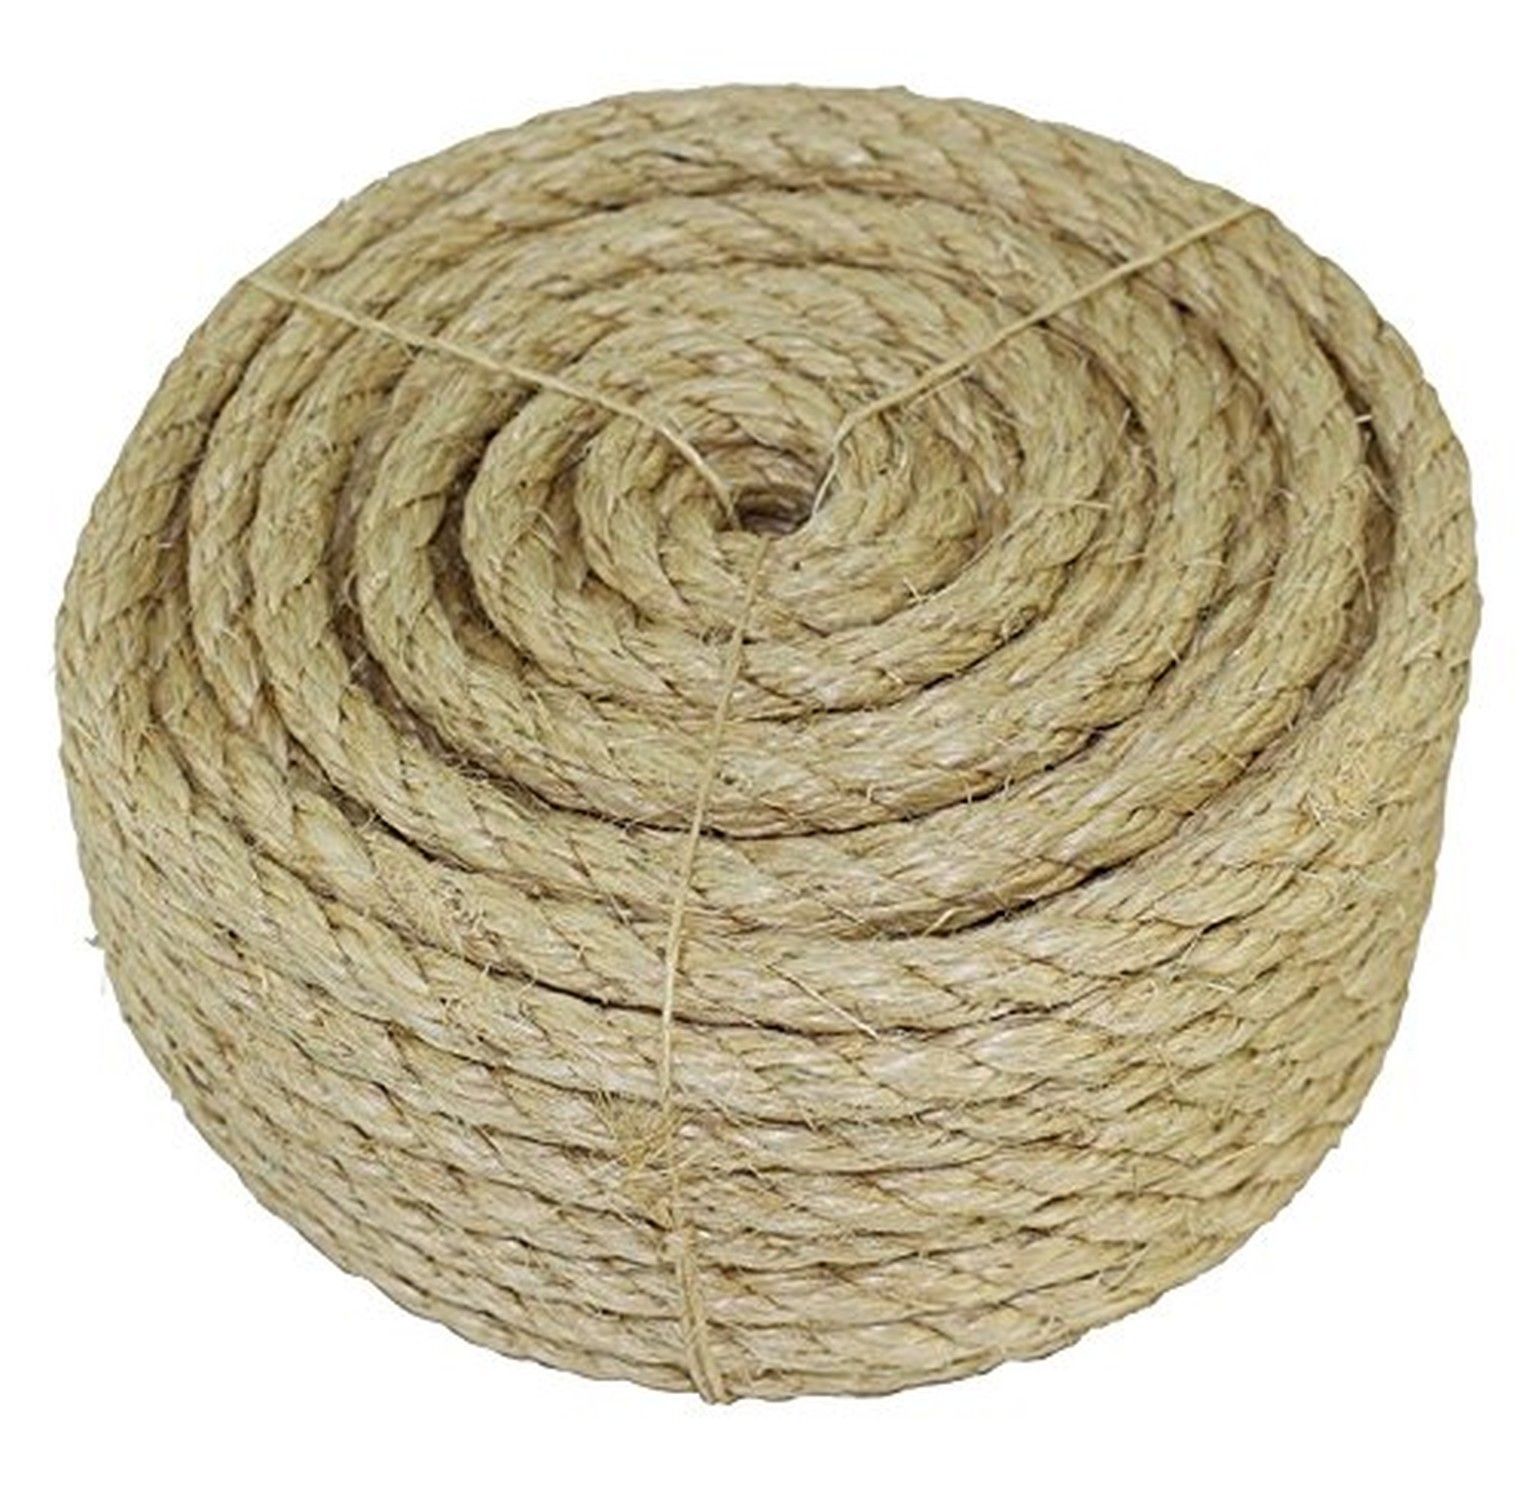 OEM/ODM Factory Braided Jute Rope - 100% Natural Eco-friendly Twisted Sisal Rope Diameter 6mm/8mm/10mm – Florescence